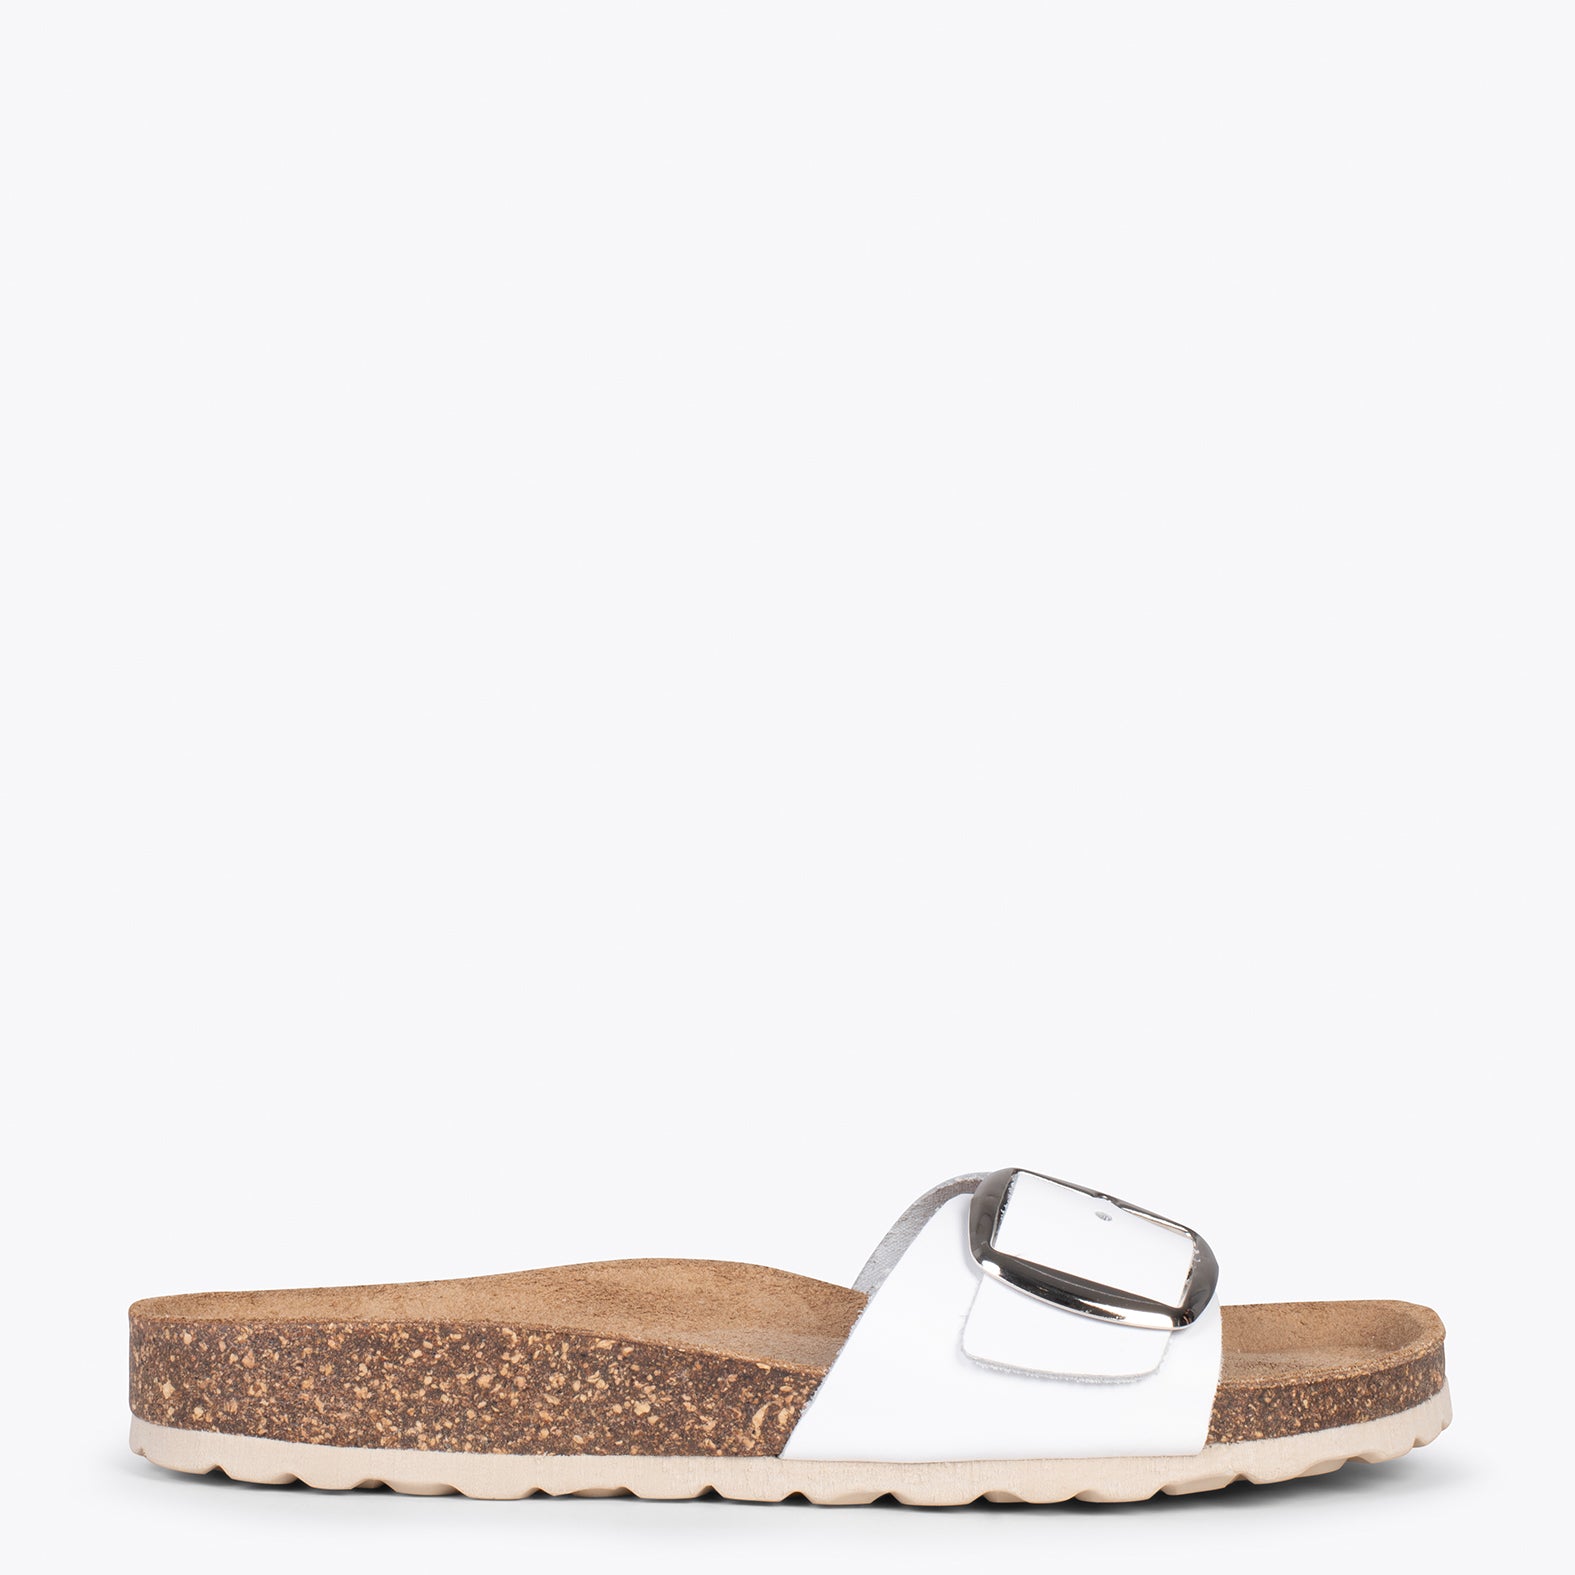 CLAVEL – WHITE leather slides with buckle